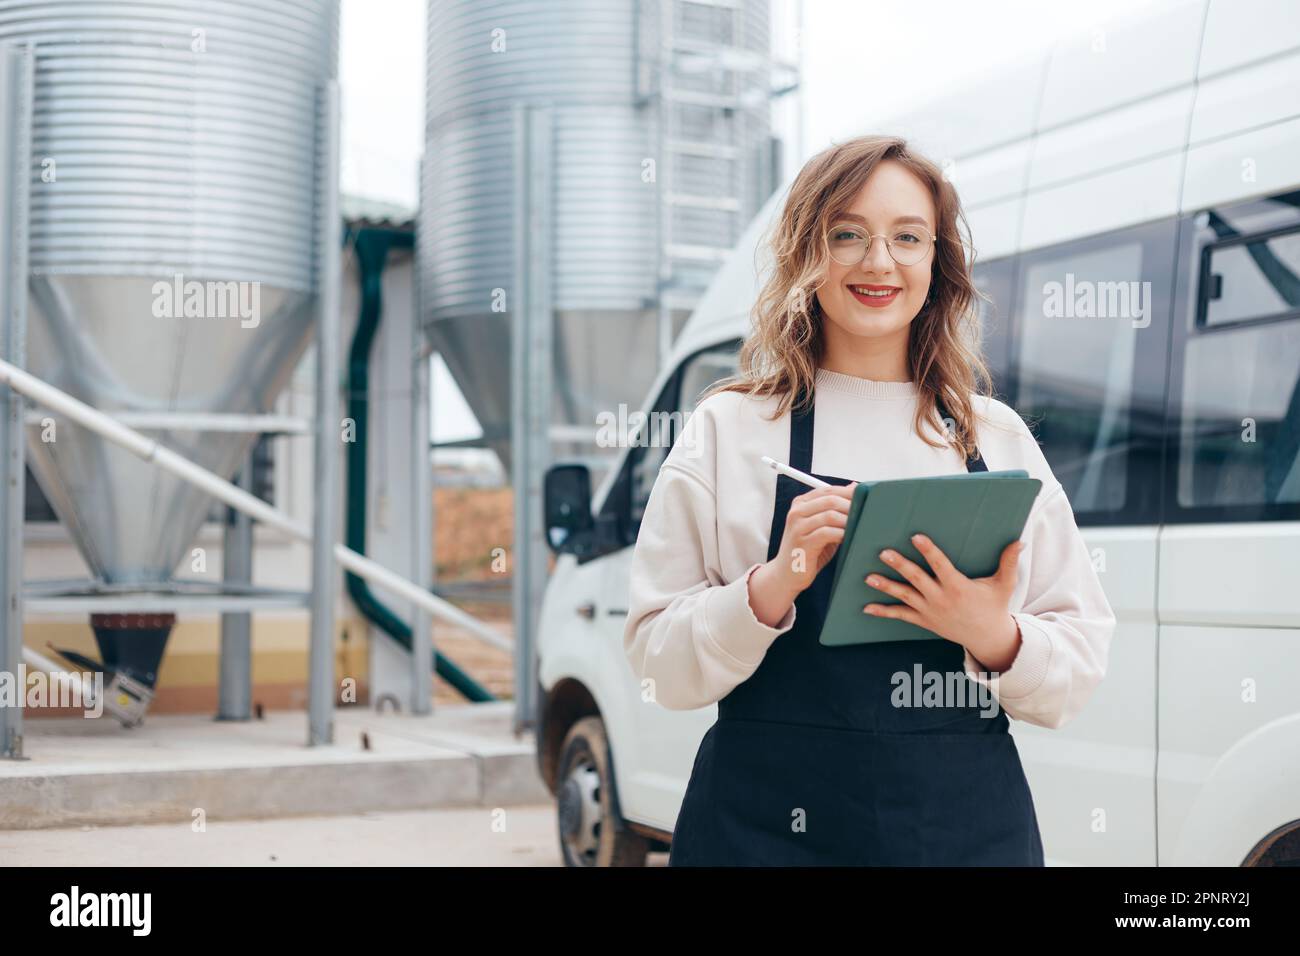 Woman Agricultural Engineer with Tablet Near Cyclone Industrial Equipment Stock Photo